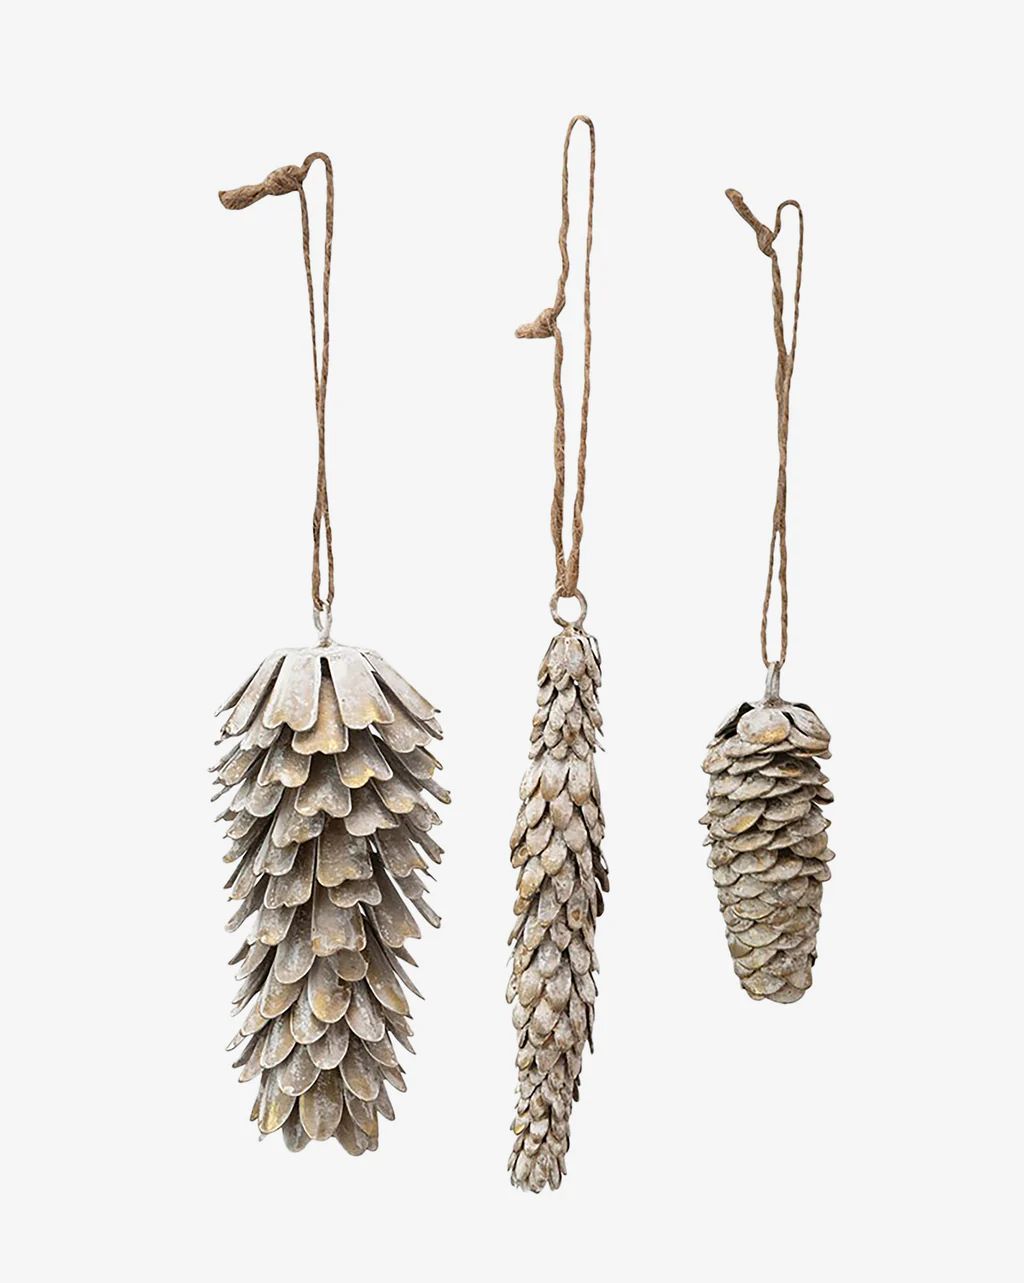 Whitewashed Pinecone Ornaments (Set of 3) | McGee & Co.